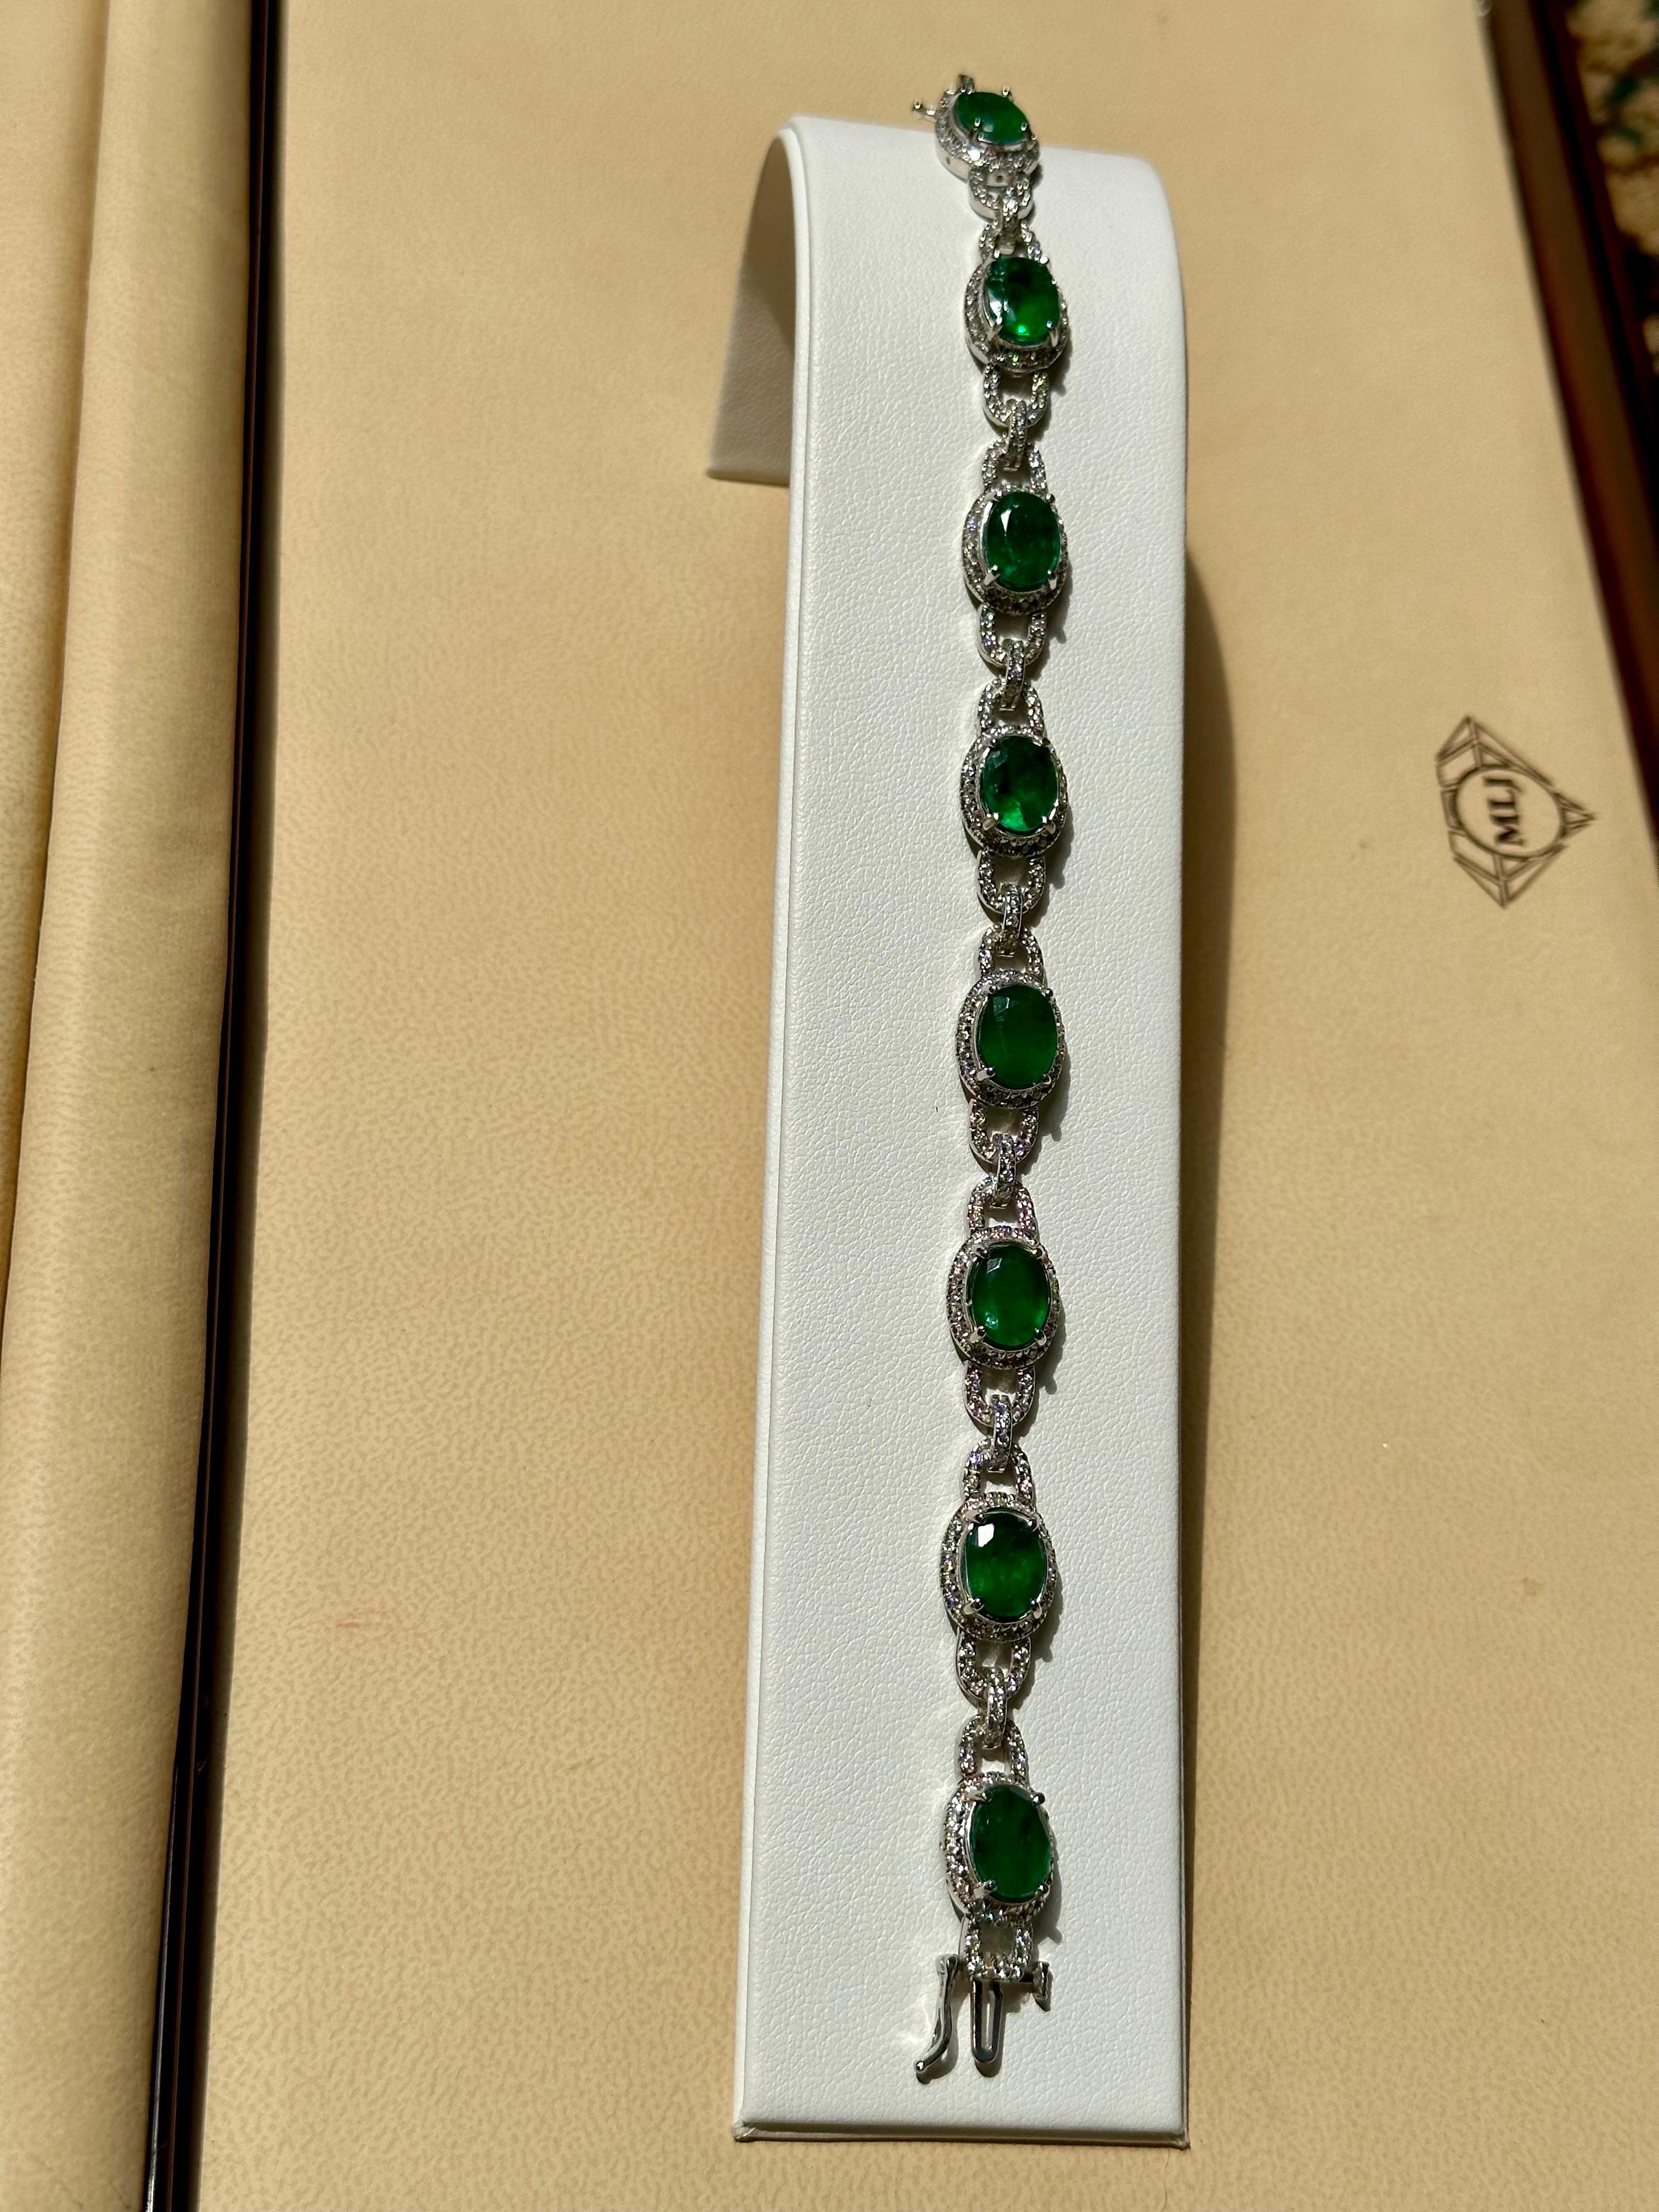 24 Carat Natural Brazilian Emerald & Diamond Link Tennis Bracelet 14 Karat Gold
 This exceptionally affordable Tennis  bracelet has  8 stones of oval  Emeralds  . Each Emerald is spaced by two links of diamonds . Total weight of the Emeralds is 